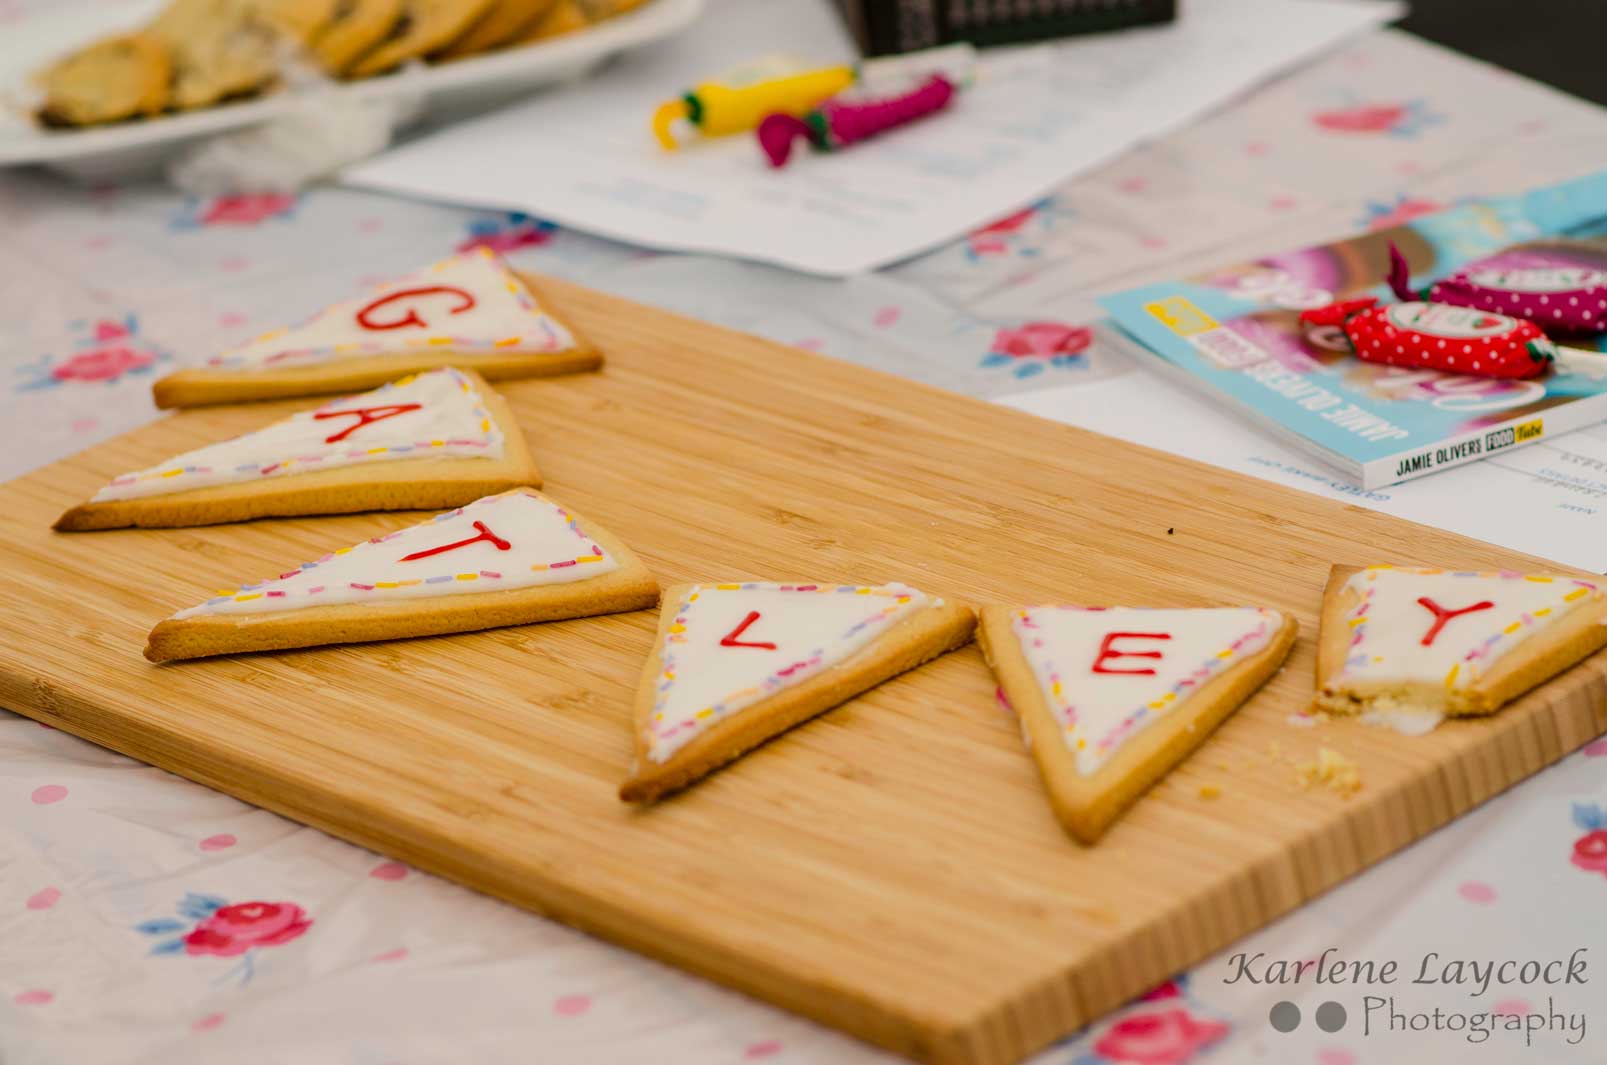 Photograph of Bunting Shaped Cookies taken at Gatley Bake Off Event